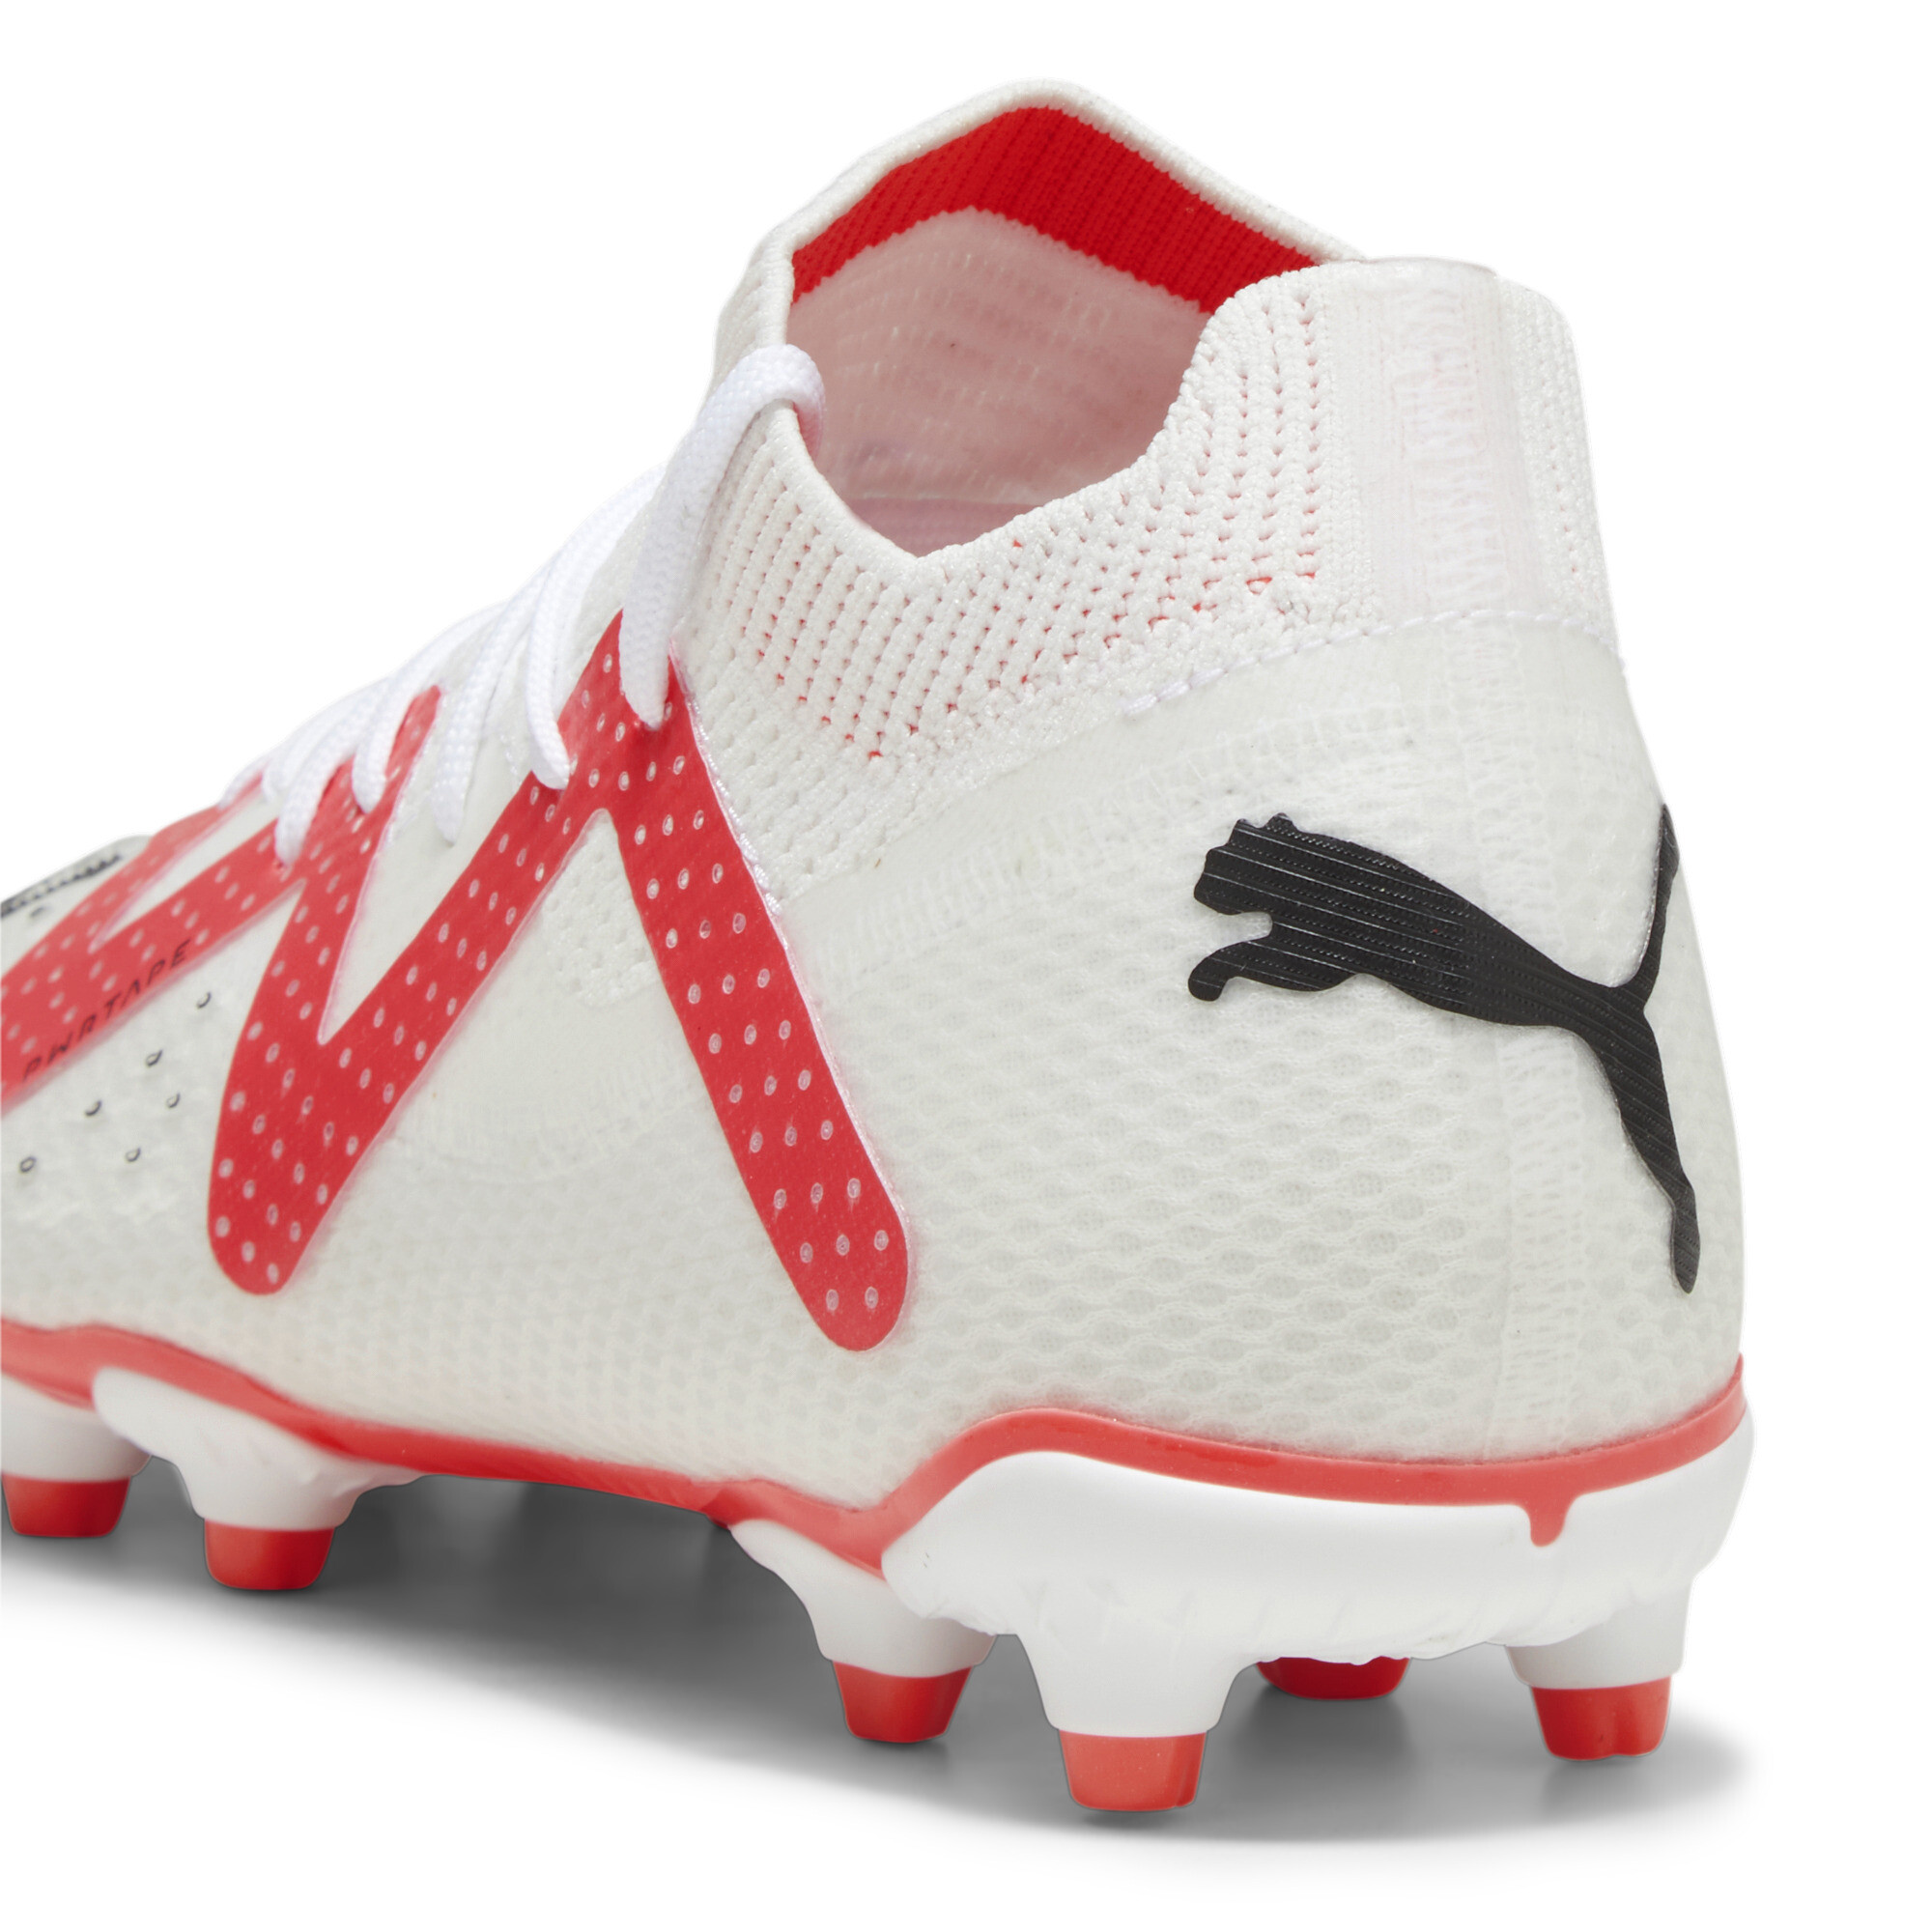 Puma FUTURE PRO FG/AG Youth Football Boots, White, Size 28, Shoes